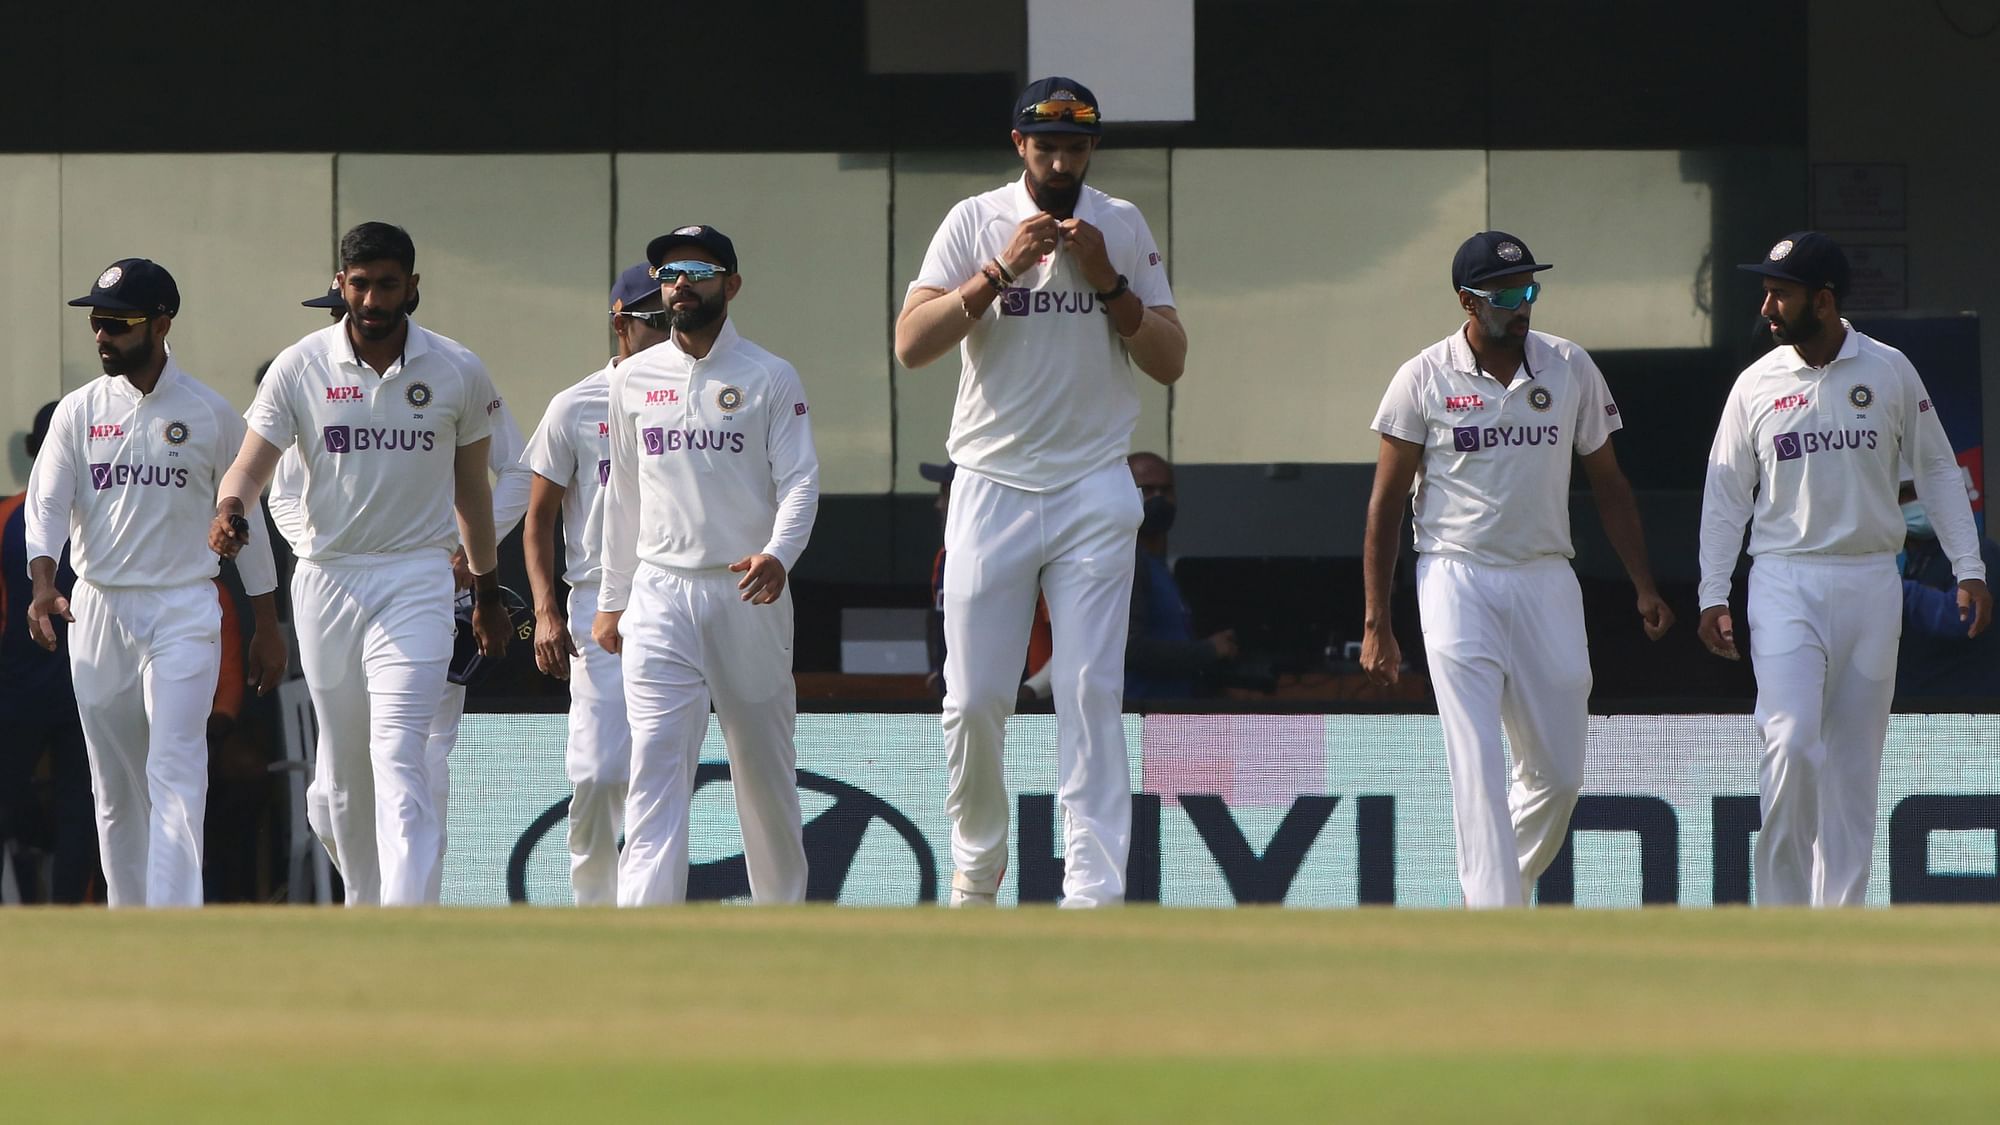 India take the field during England’s first innings in the first Chennai Test